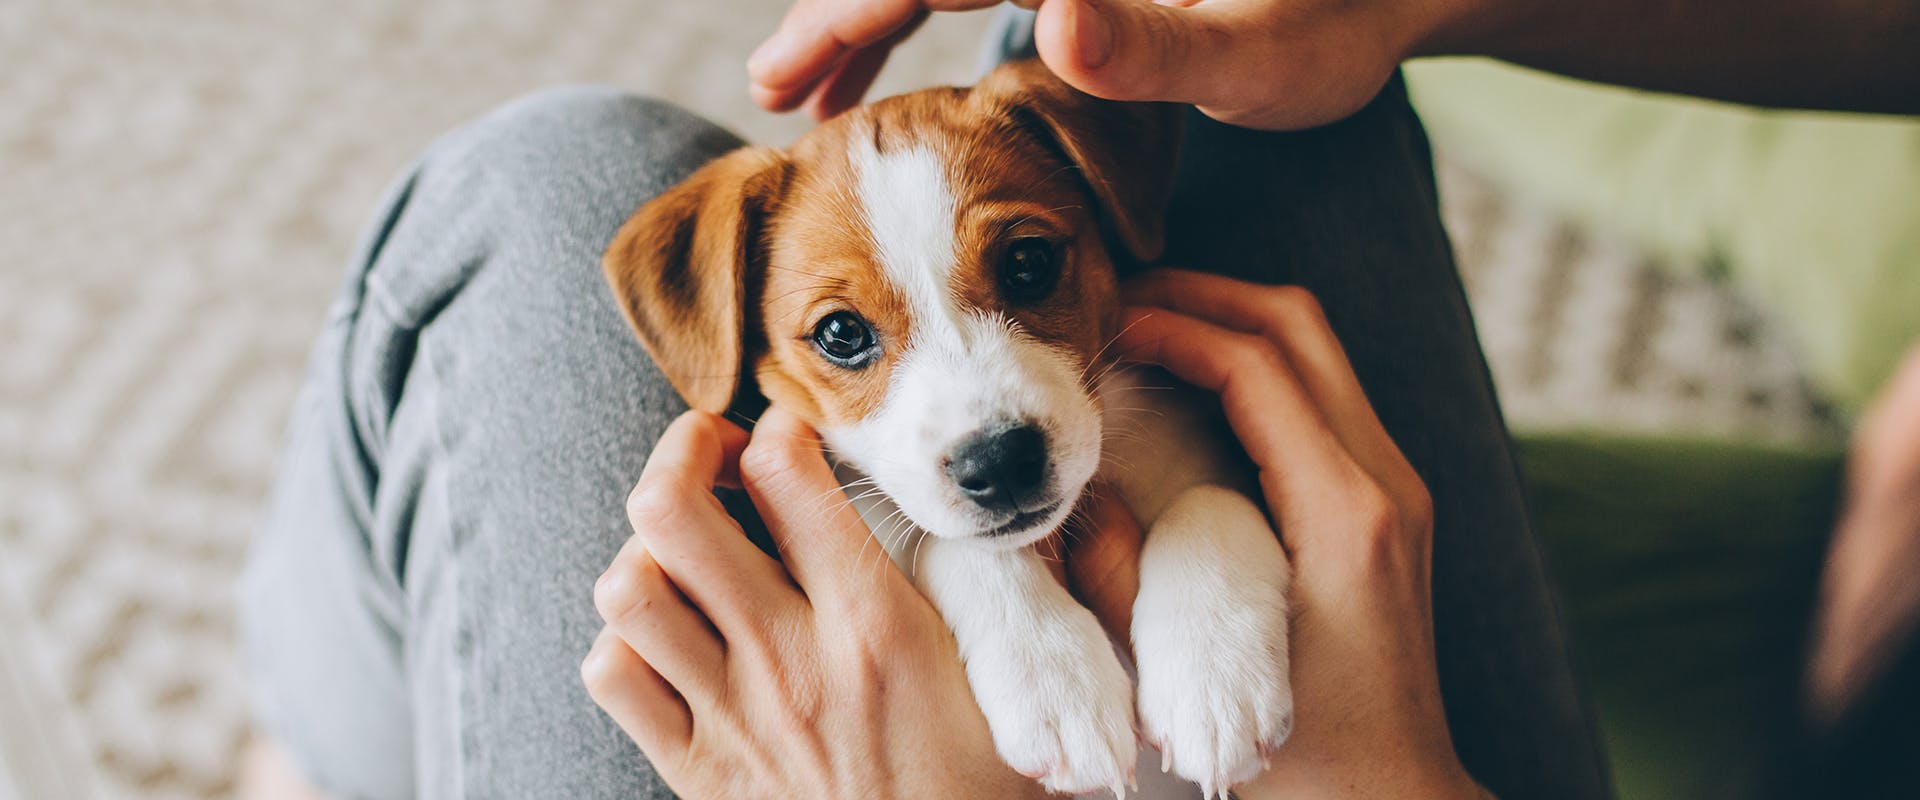 A cute Jack Russell puppy lying on its back on a person's legs, the person's hands wrapped around them